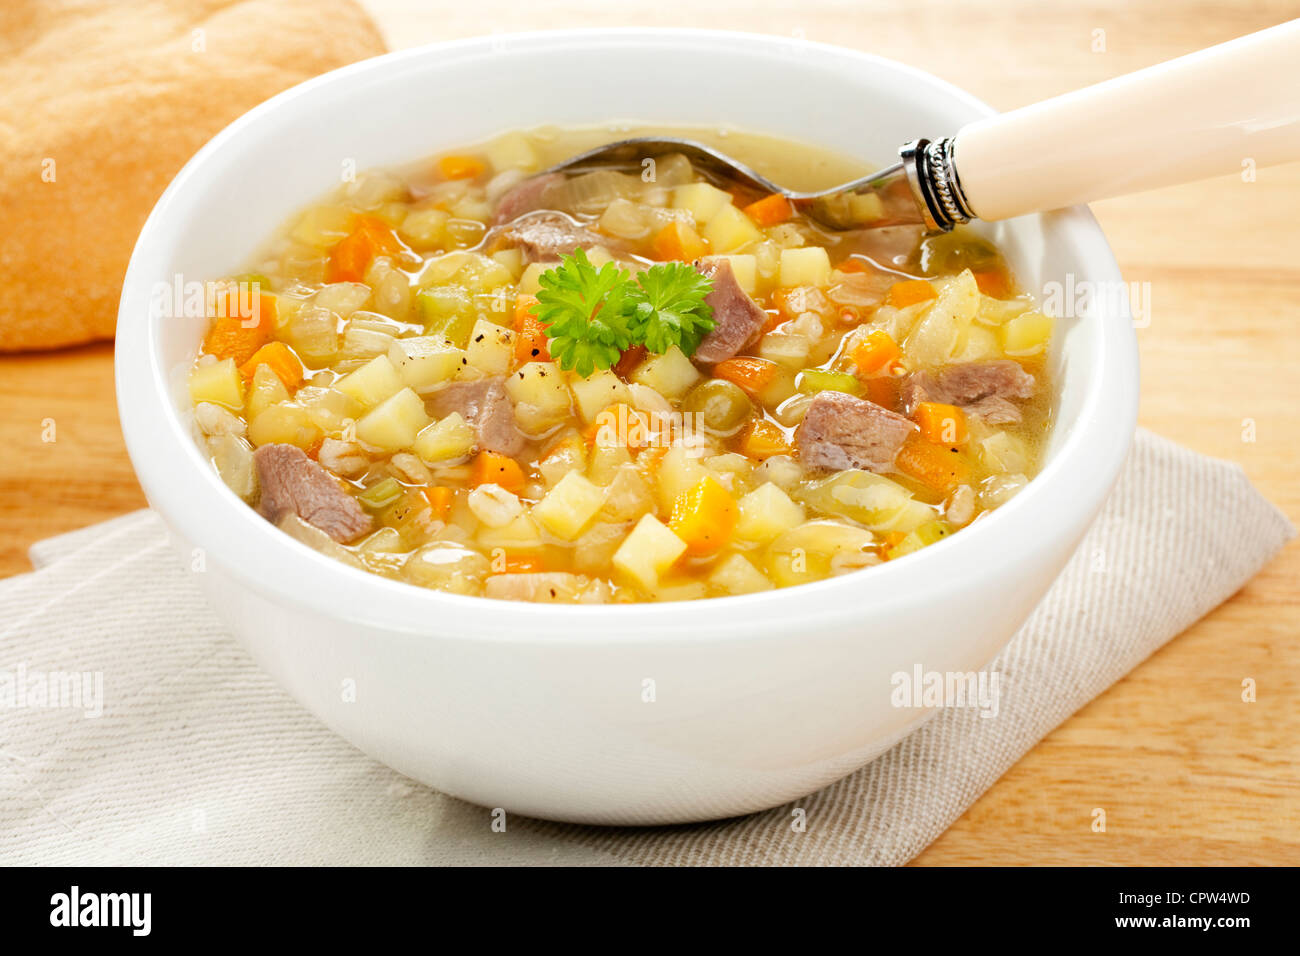 A bowl of bubbling hot Scotch Broth or Vegetable Soup, made from lamb shank, potato,carrot,celery,dried peas and pearl barley. Stock Photo